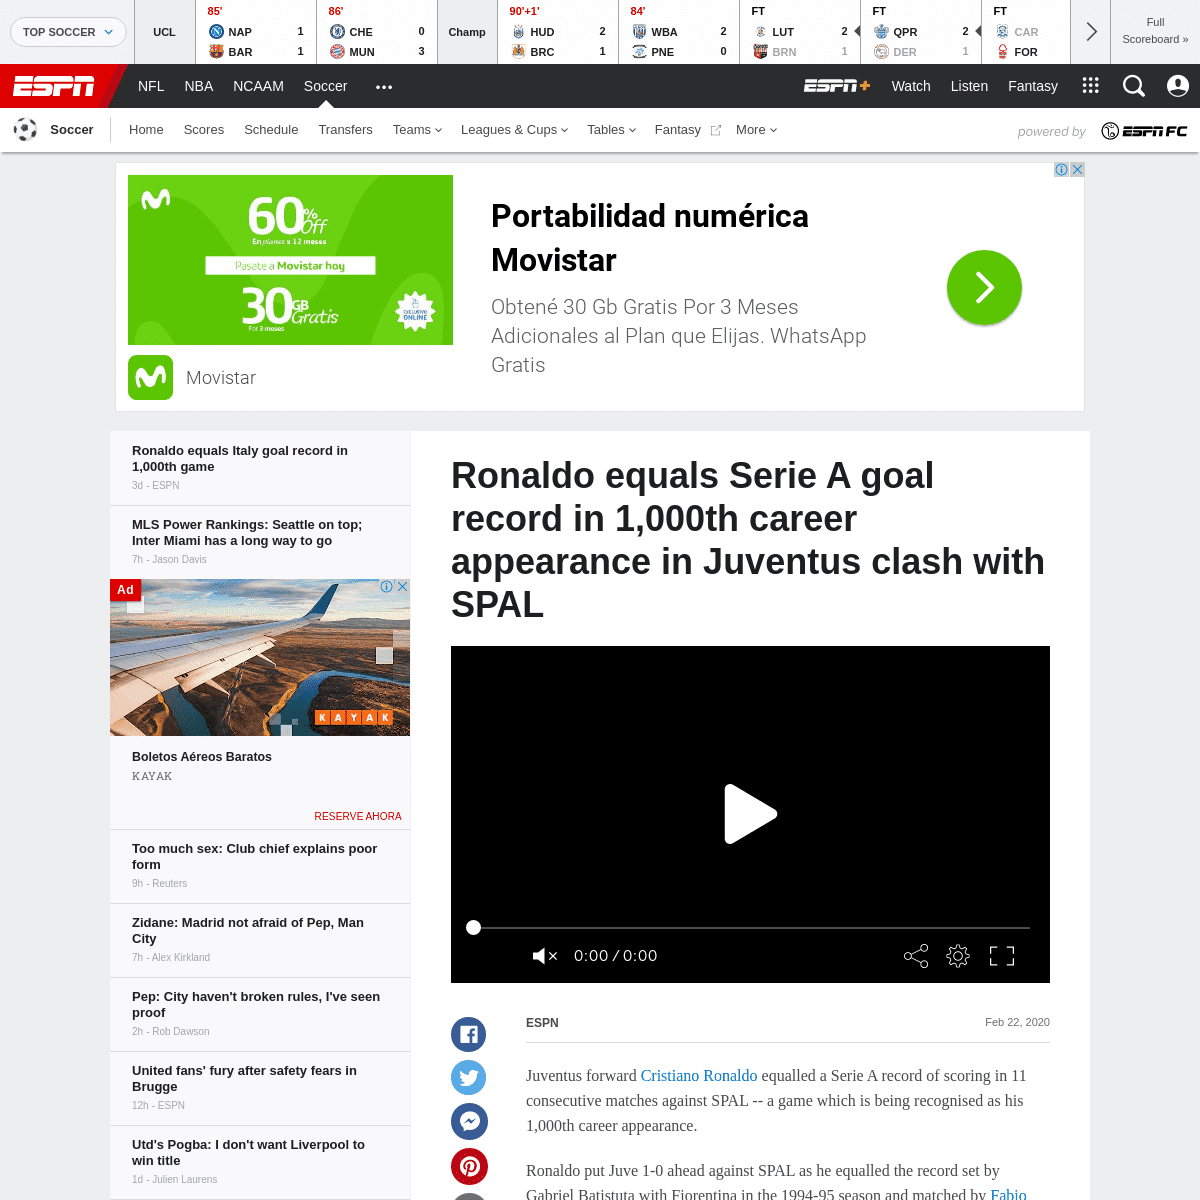 A complete backup of www.espn.com/soccer/juventus/story/4058087/ronaldo-equals-serie-a-goal-record-in-1